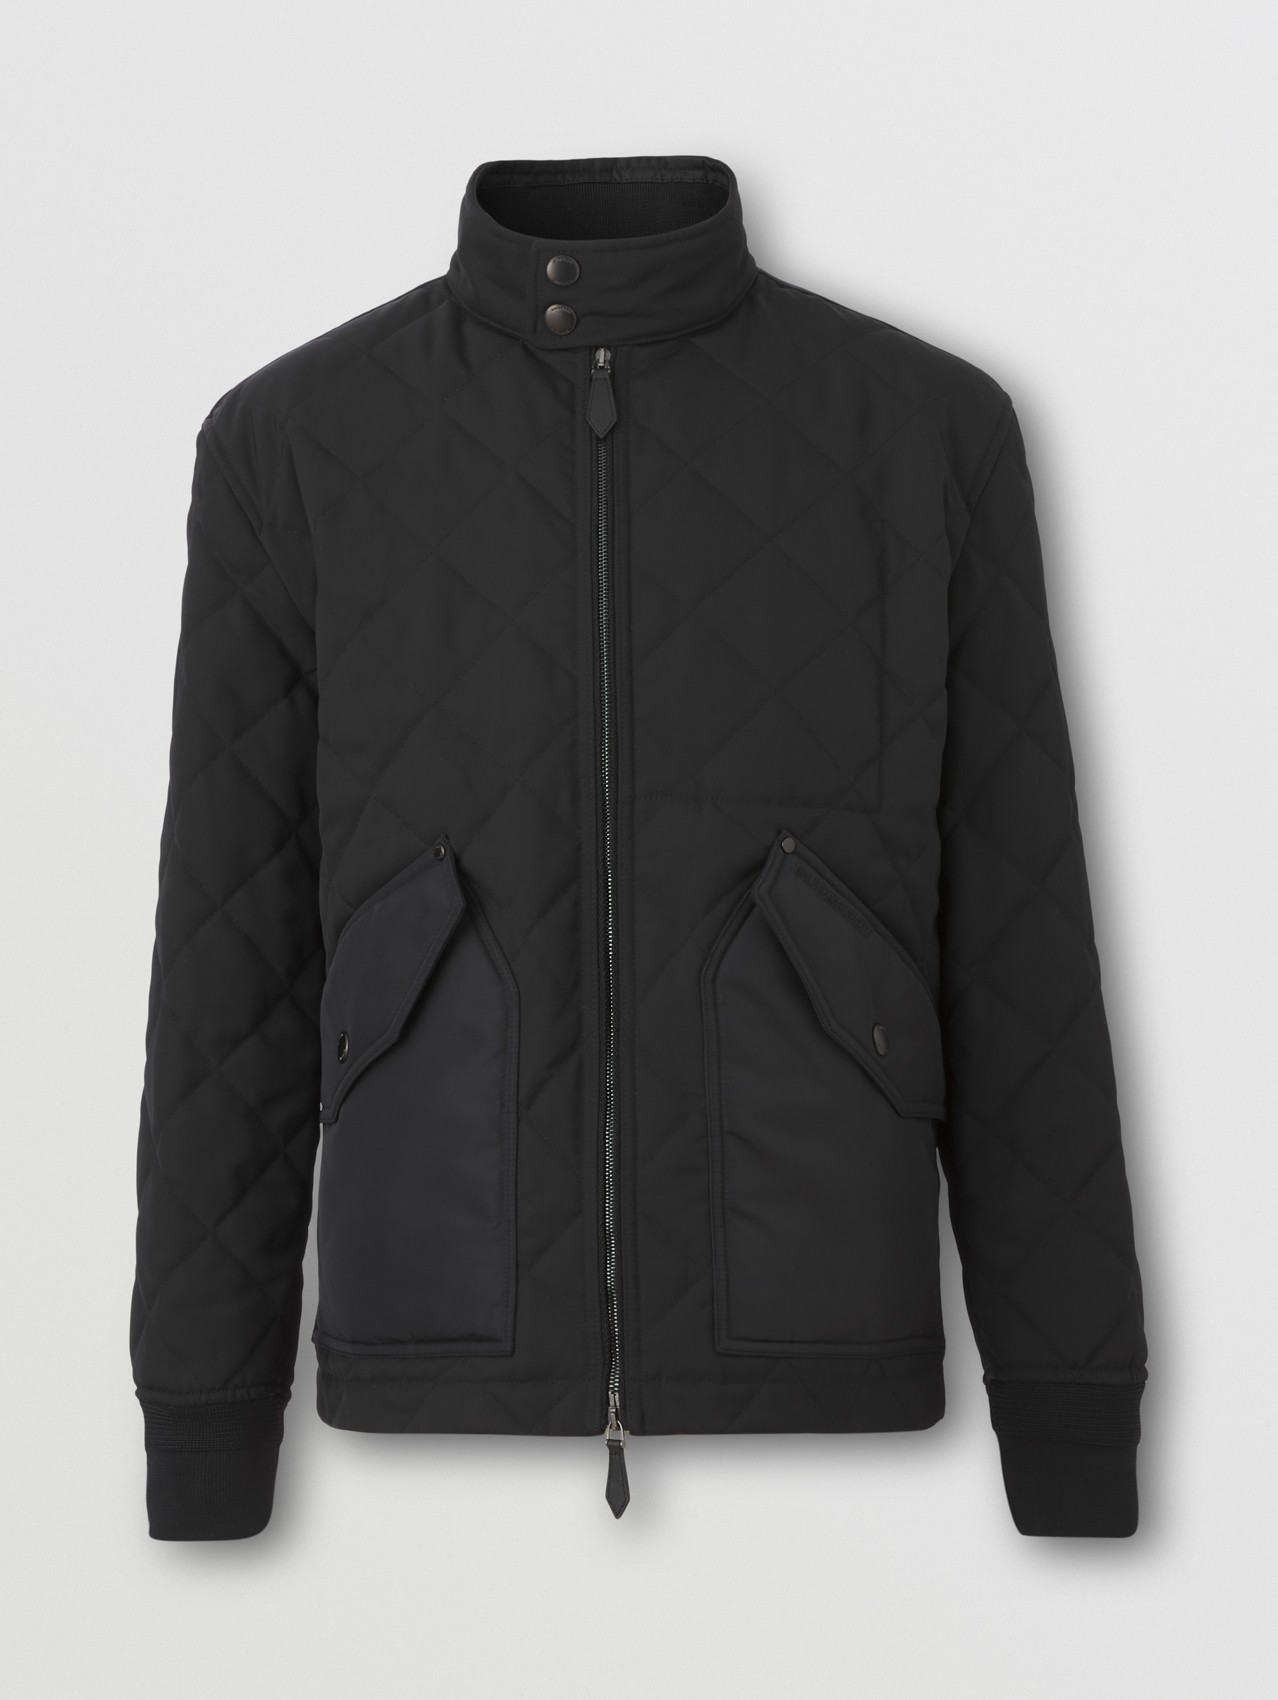 Diamond Quilted Thermoregulated Jacket in Black